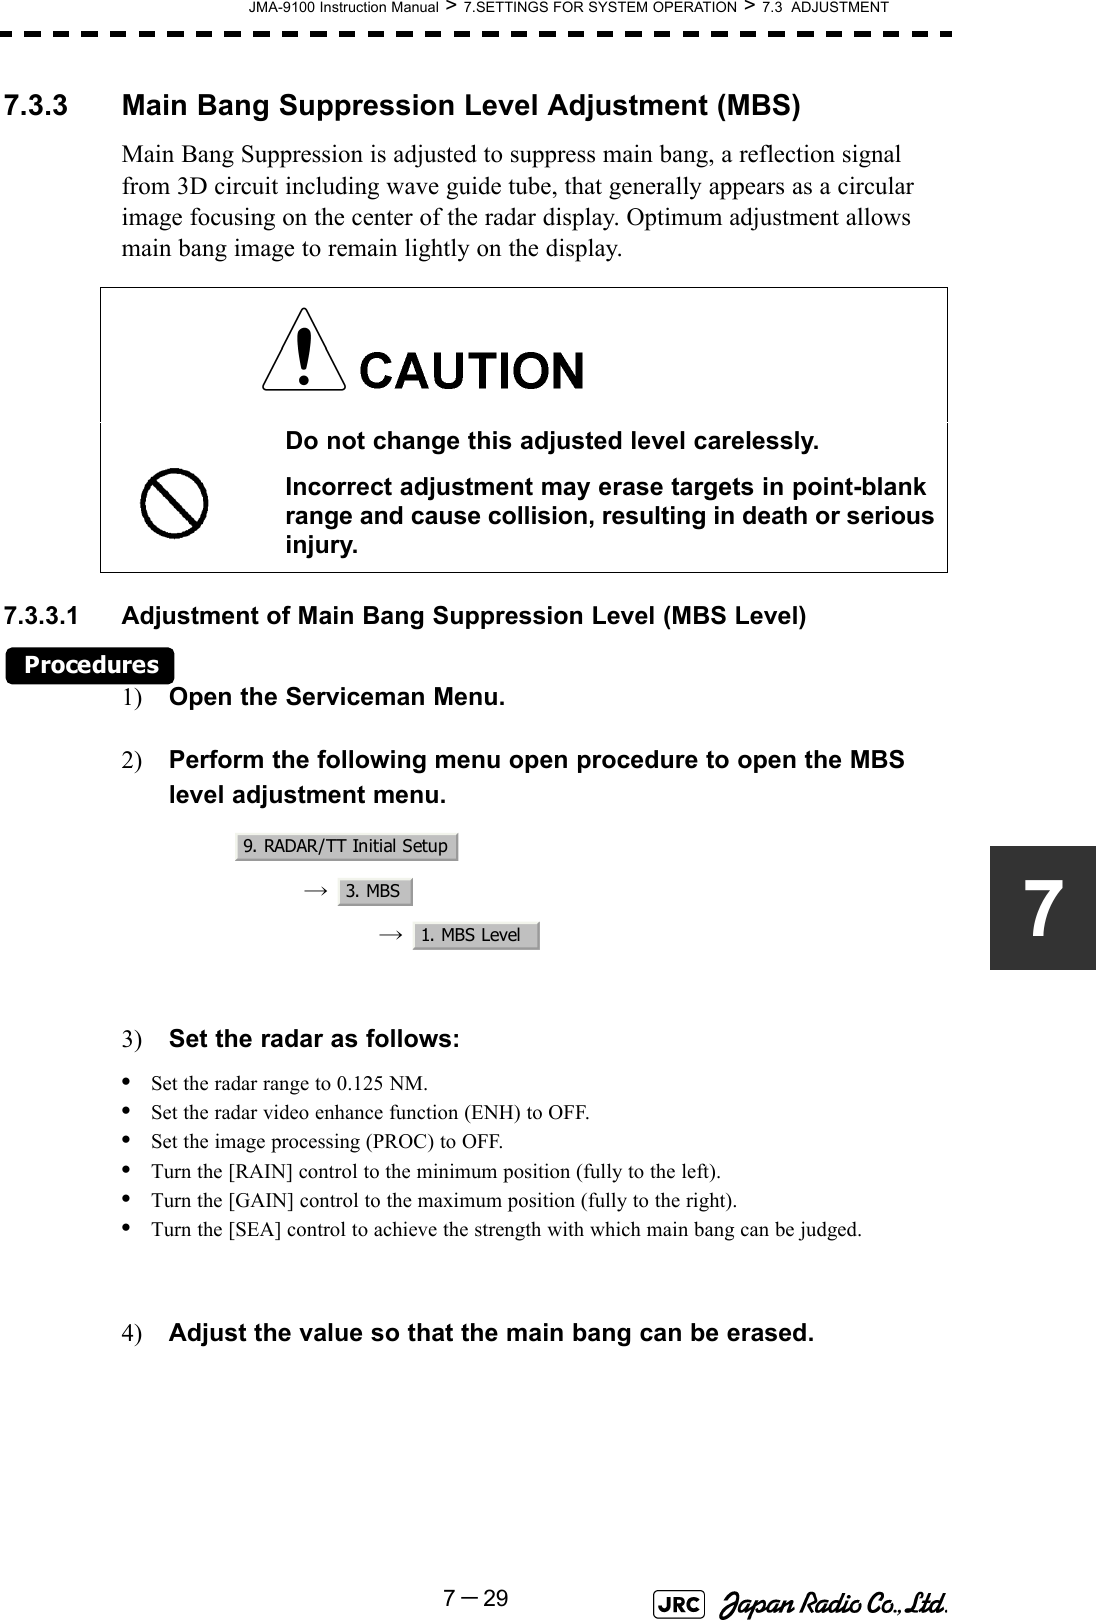 JMA-9100 Instruction Manual &gt; 7.SETTINGS FOR SYSTEM OPERATION &gt; 7.3  ADJUSTMENT7－2977.3.3 Main Bang Suppression Level Adjustment (MBS)Main Bang Suppression is adjusted to suppress main bang, a reflection signal from 3D circuit including wave guide tube, that generally appears as a circular image focusing on the center of the radar display. Optimum adjustment allows main bang image to remain lightly on the display.7.3.3.1 Adjustment of Main Bang Suppression Level (MBS Level)Procedures1) Open the Serviceman Menu.2) Perform the following menu open procedure to open the MBS level adjustment menu.→  →  3) Set the radar as follows:•Set the radar range to 0.125 NM.•Set the radar video enhance function (ENH) to OFF.•Set the image processing (PROC) to OFF.•Turn the [RAIN] control to the minimum position (fully to the left).•Turn the [GAIN] control to the maximum position (fully to the right).•Turn the [SEA] control to achieve the strength with which main bang can be judged.4) Adjust the value so that the main bang can be erased. Do not change this adjusted level carelessly.Incorrect adjustment may erase targets in point-blank range and cause collision, resulting in death or serious injury.9. RADAR/TT Initial Setup3. MBS1. MBS Level